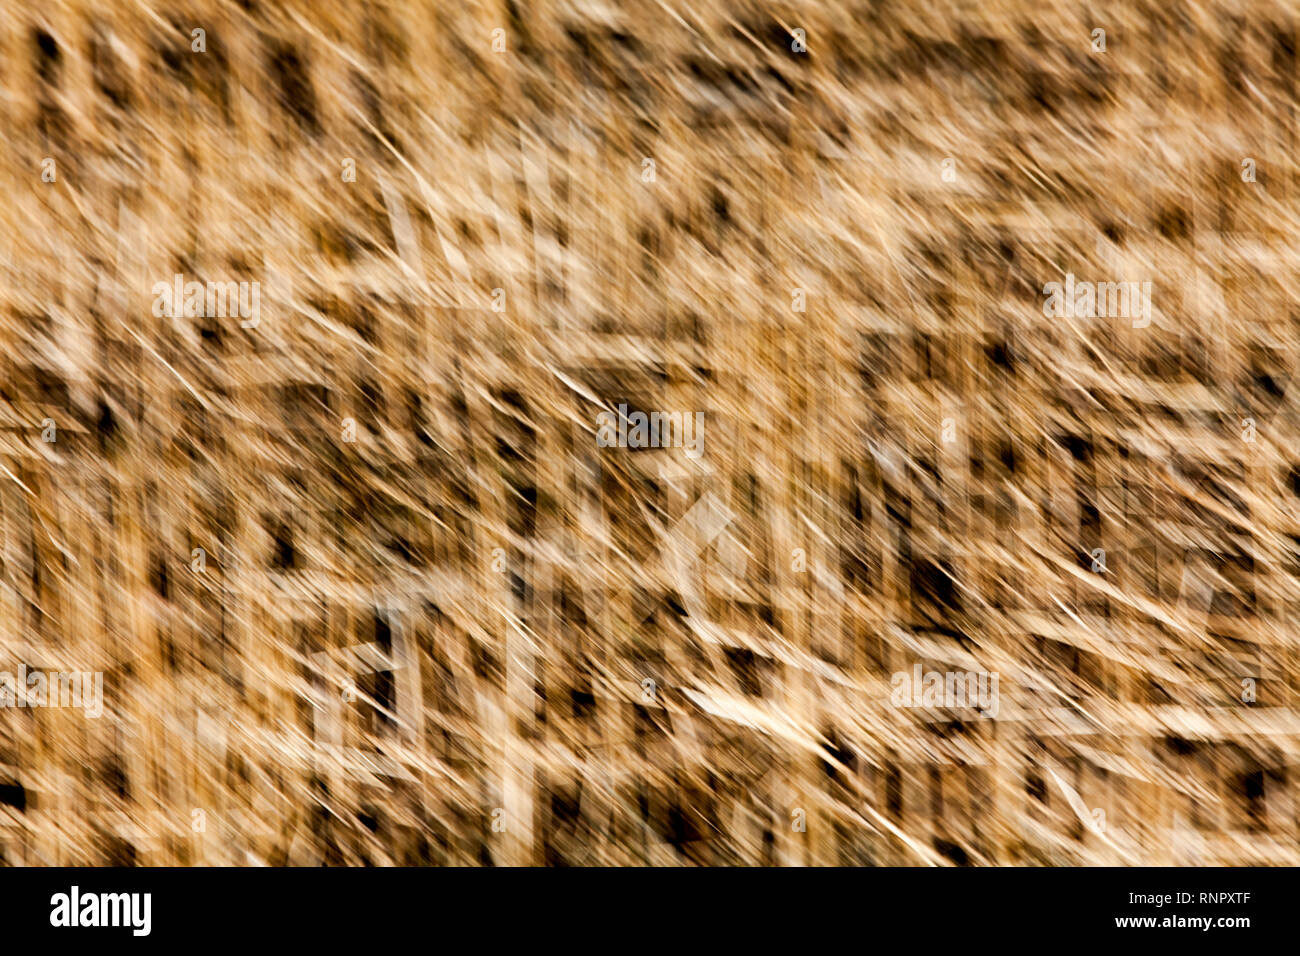 Structures in dry grass, closeup, with a blurred wipe effect Stock Photo